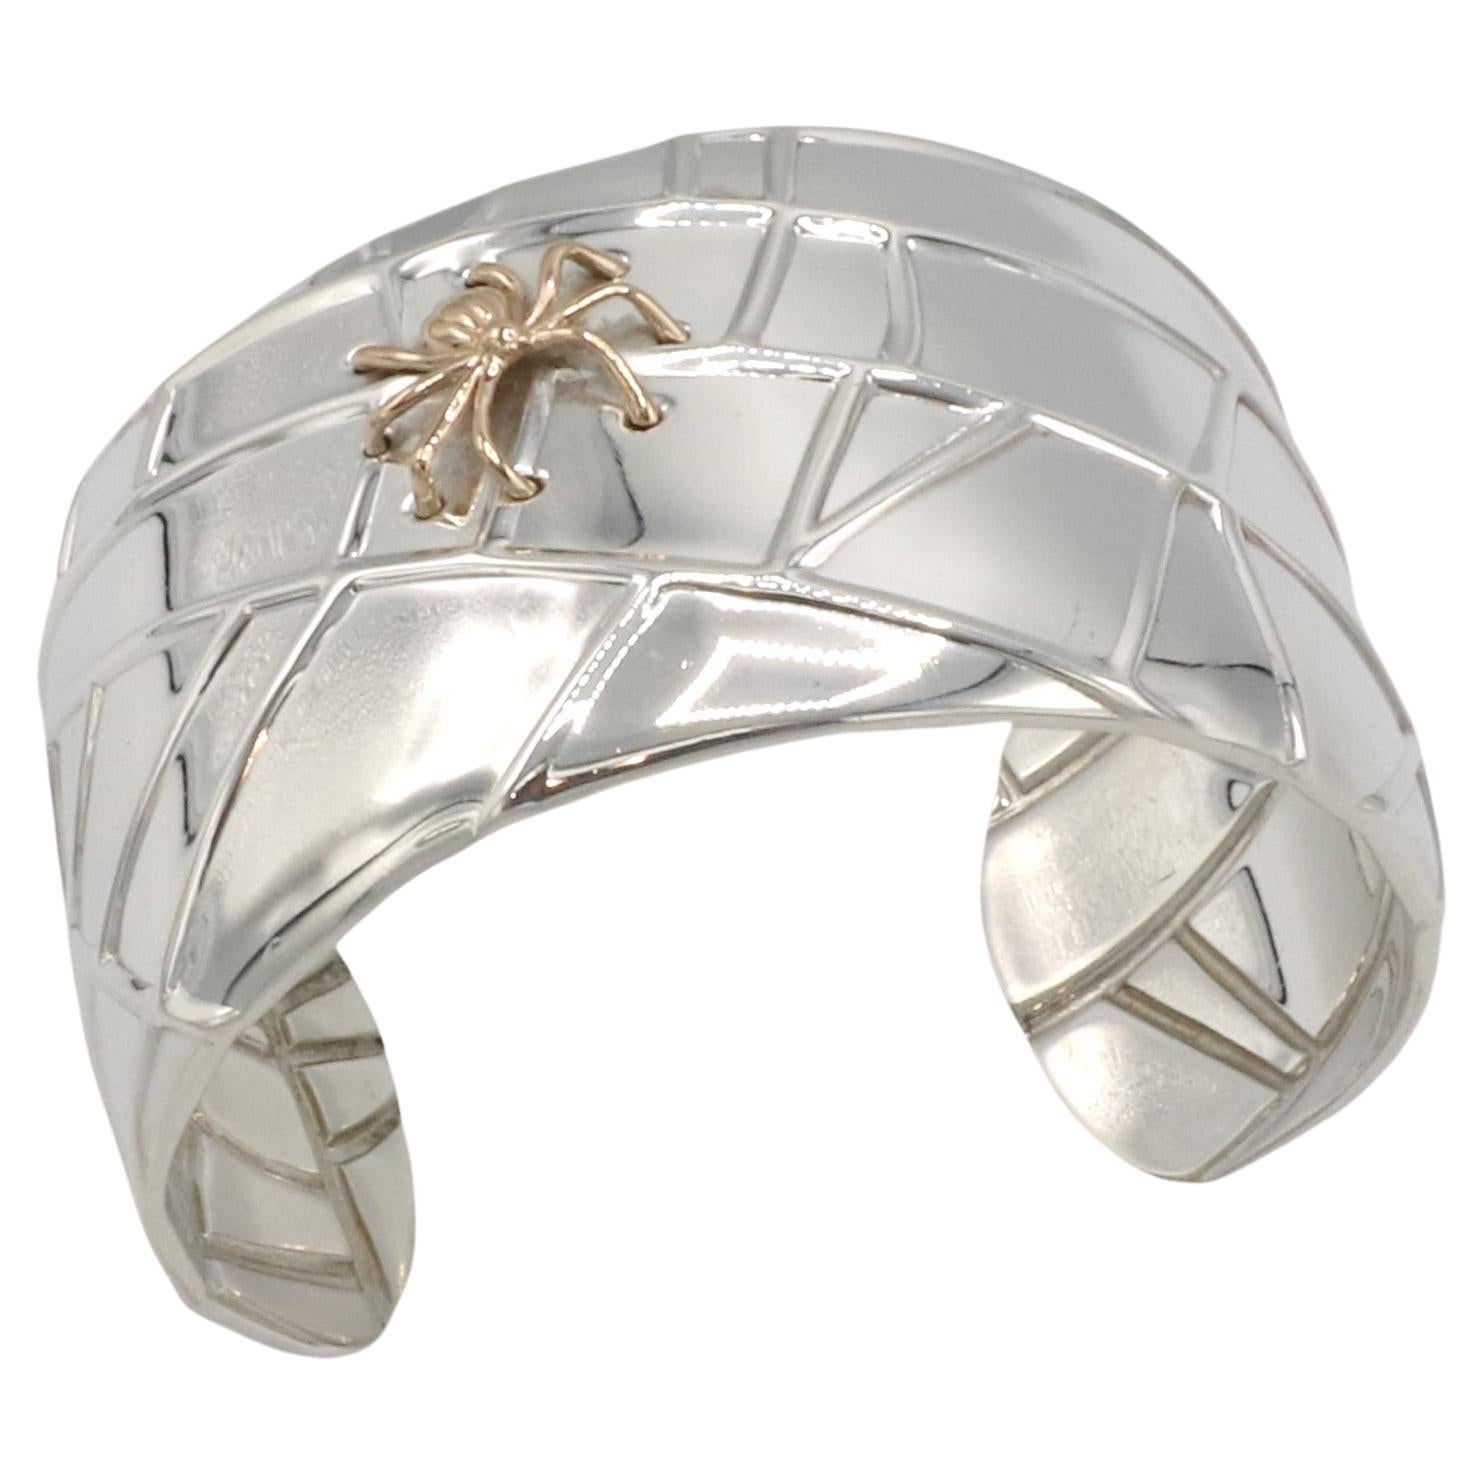 Tiffany & Co. Sterling Silver & Gold Spider Cuff Bracelet 
Metal: Sterling silver, 18k gold
Weight: 92.07 grams
Width: 38mm
Diameter: 60mm
Circumference: Approx. 7 inches